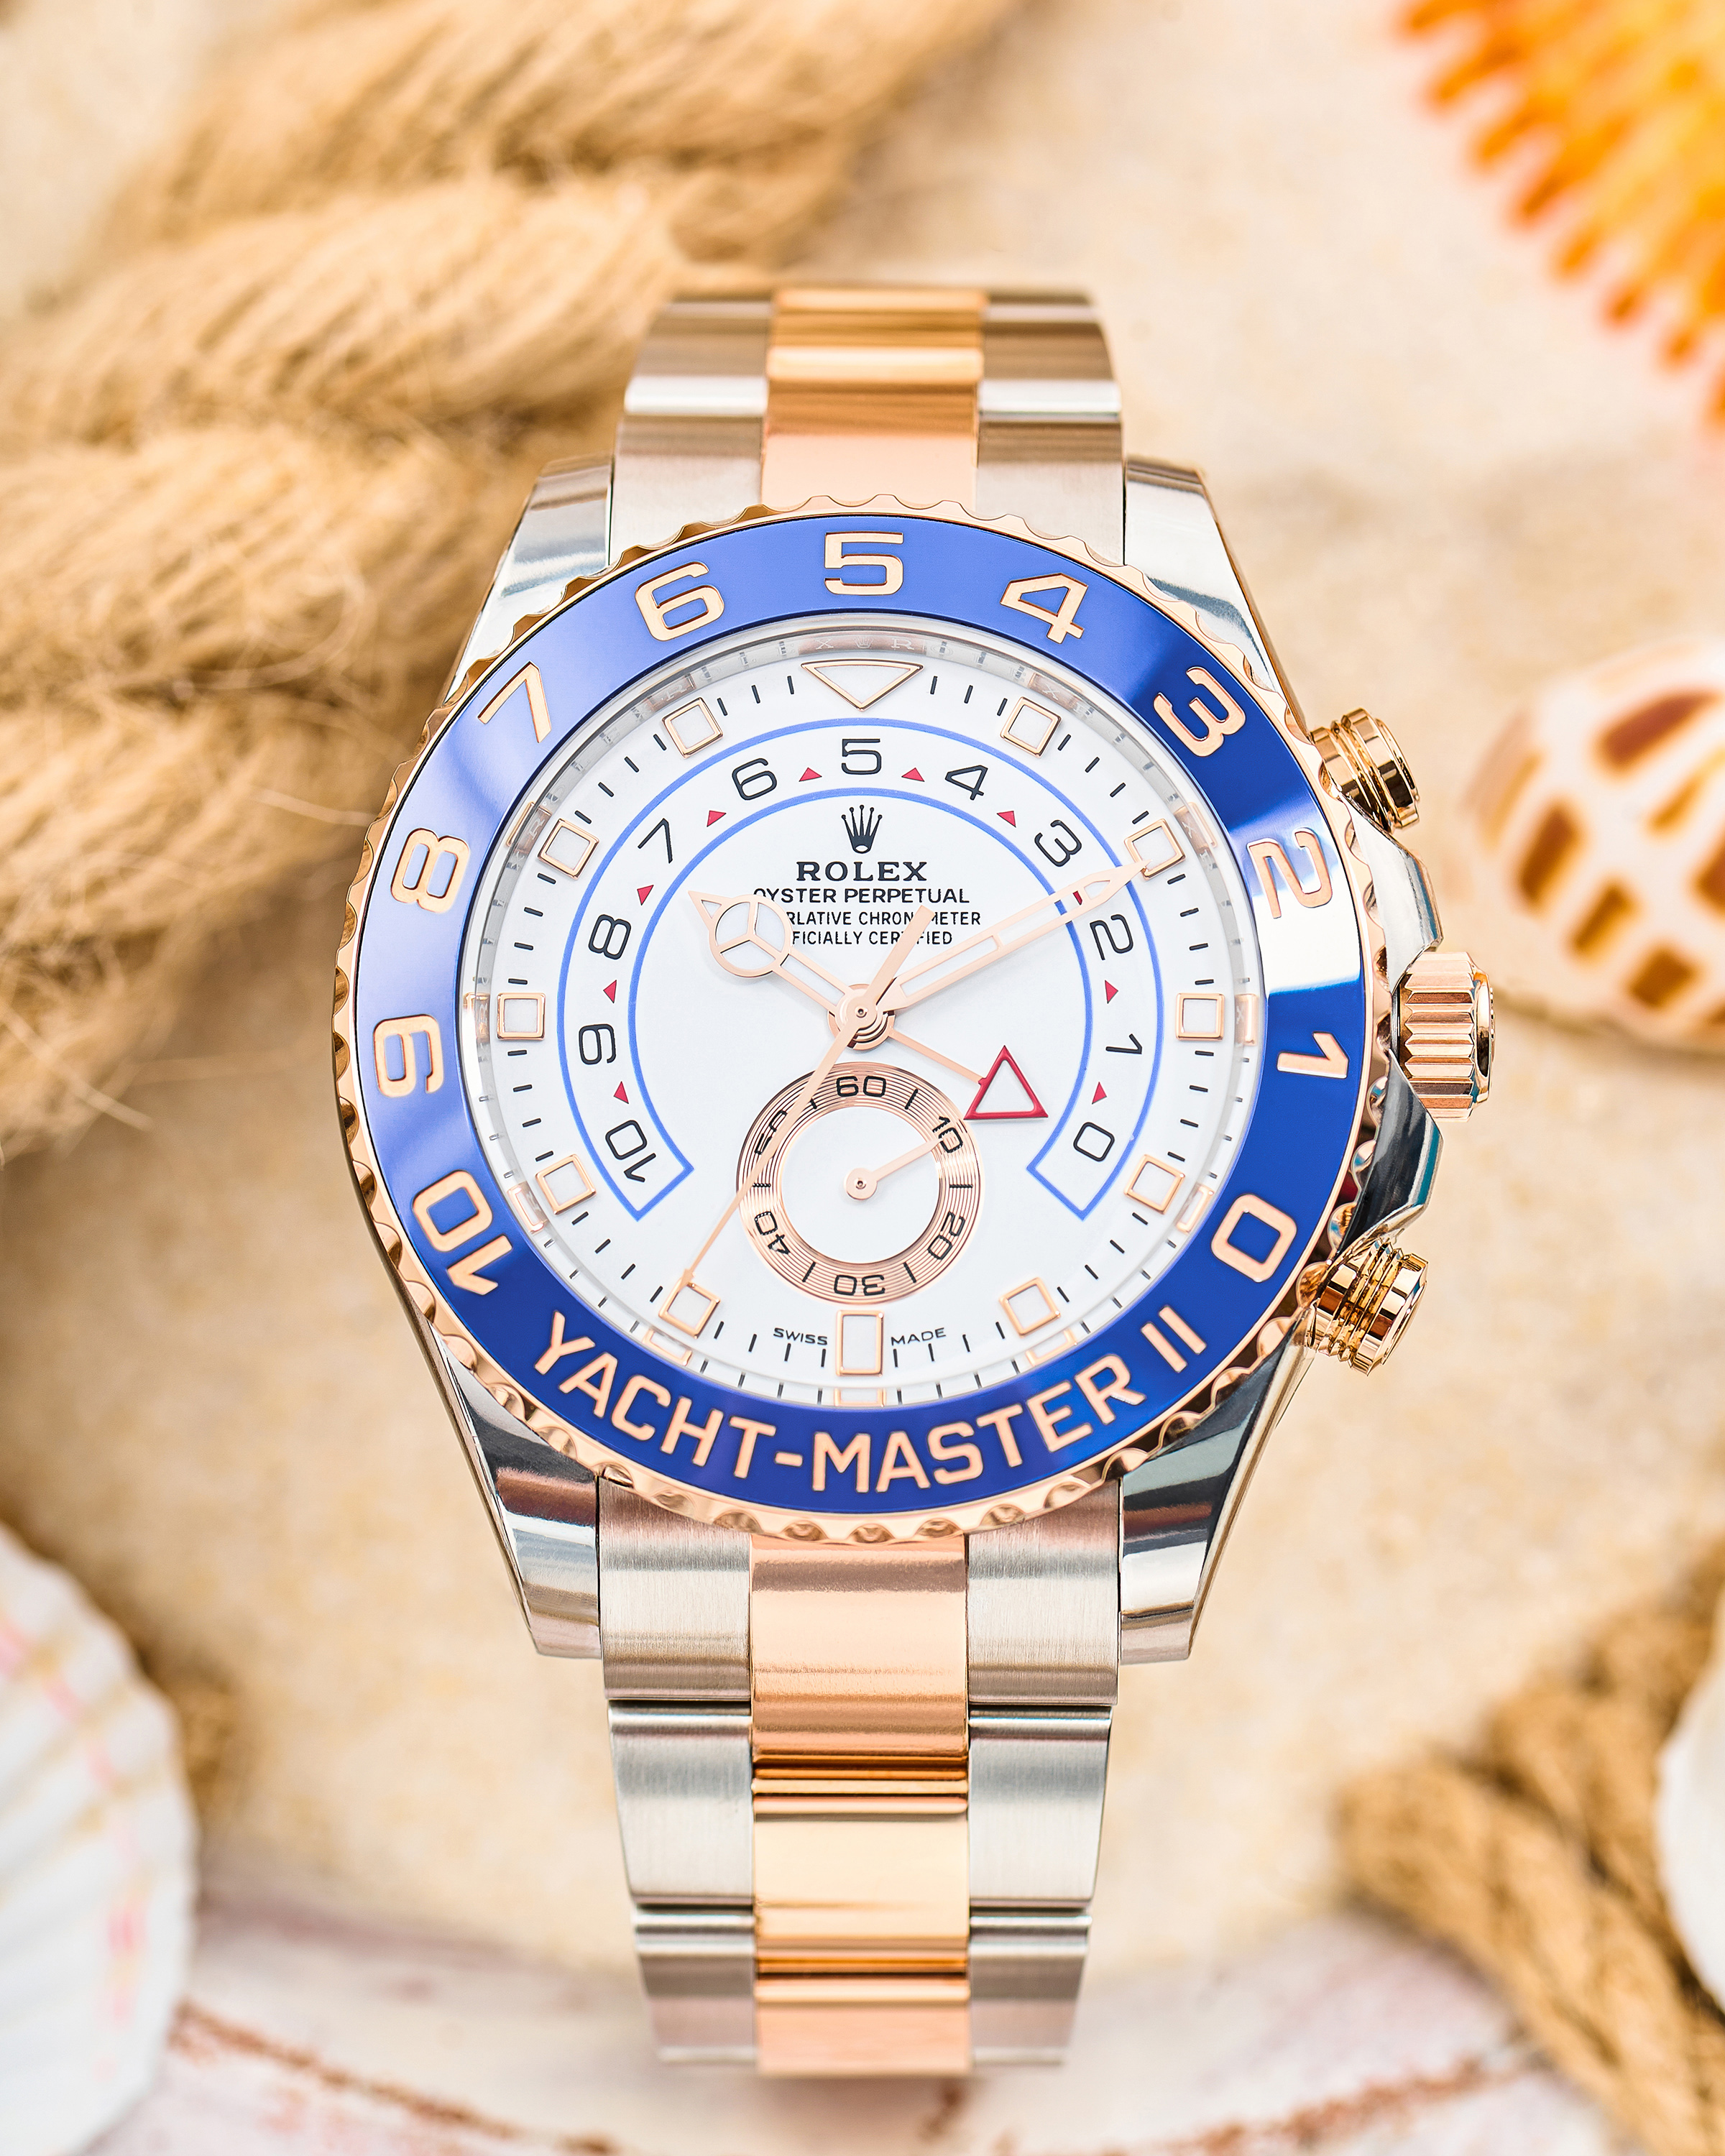 18K Yellow Gold 44 mm Luxury Watch with White Dial, Index Hour Markers, and a Programmable Countdown on a Nautical Background.